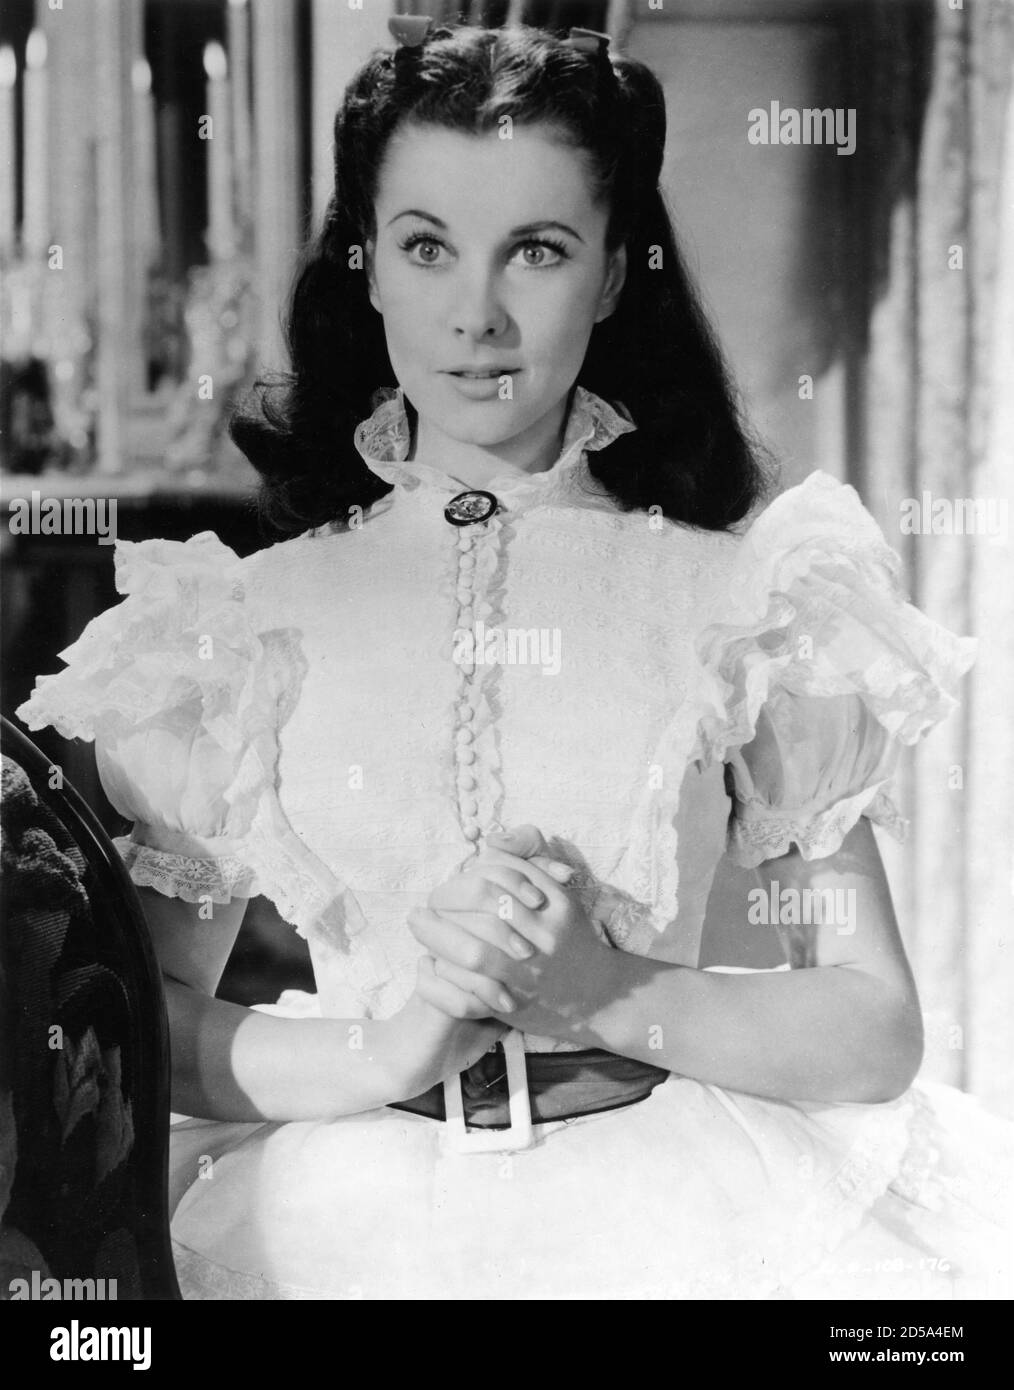 VIVIEN LEIGH in GONE WITH THE WIND 1939 director VICTOR FLEMING novel ...